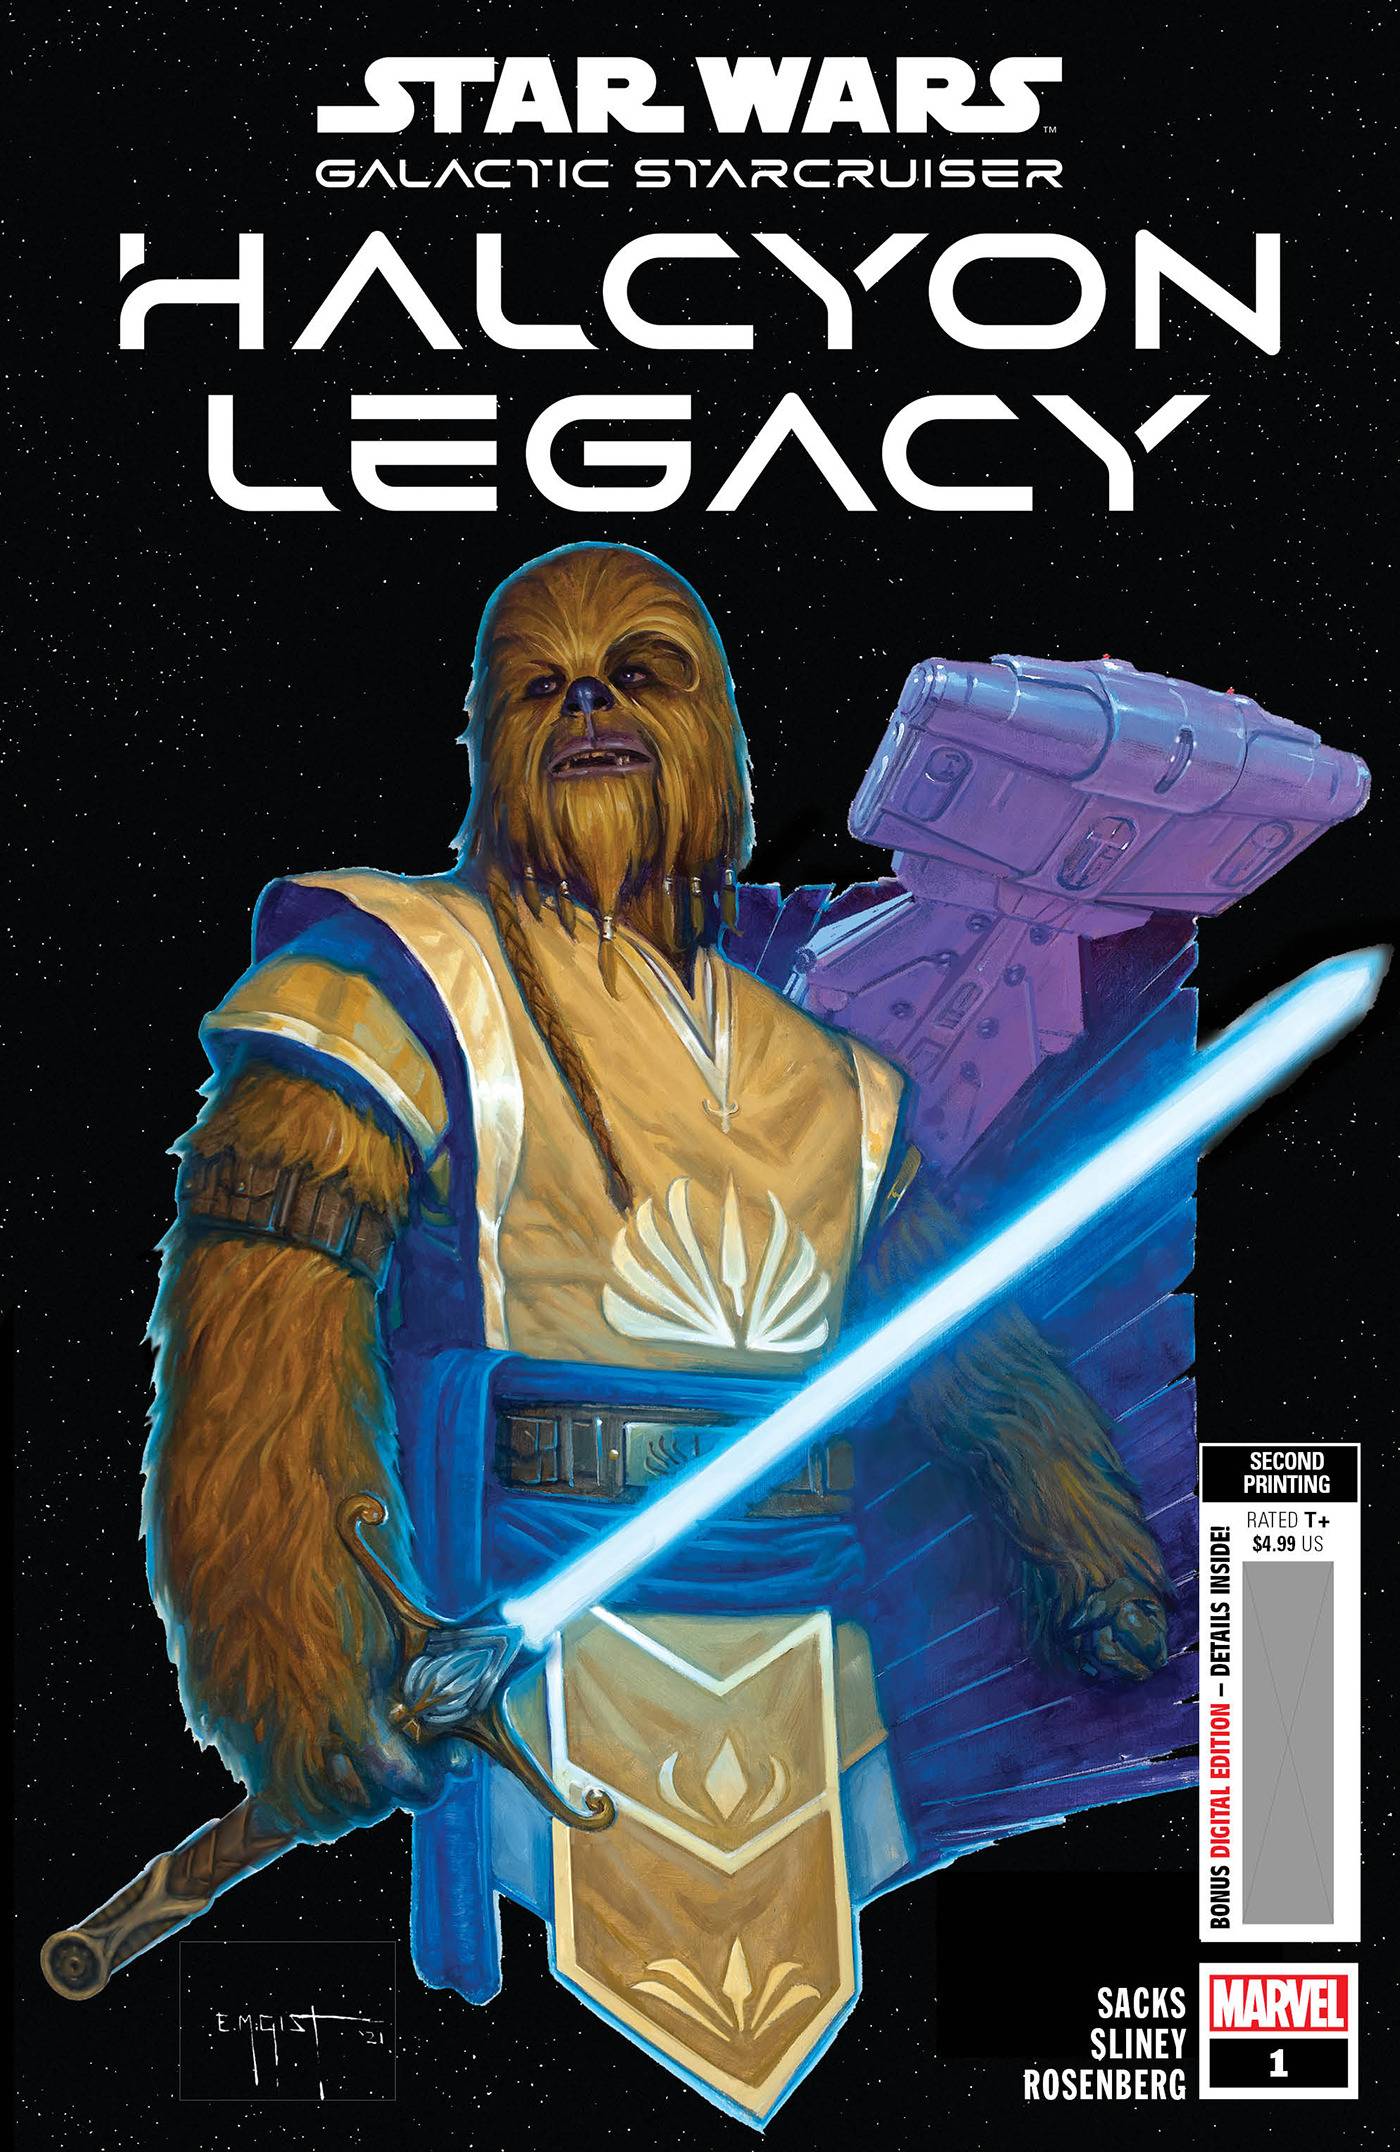 Star Wars Halcyon Legacy #1 2nd Printing Gist Variant (Of 5)